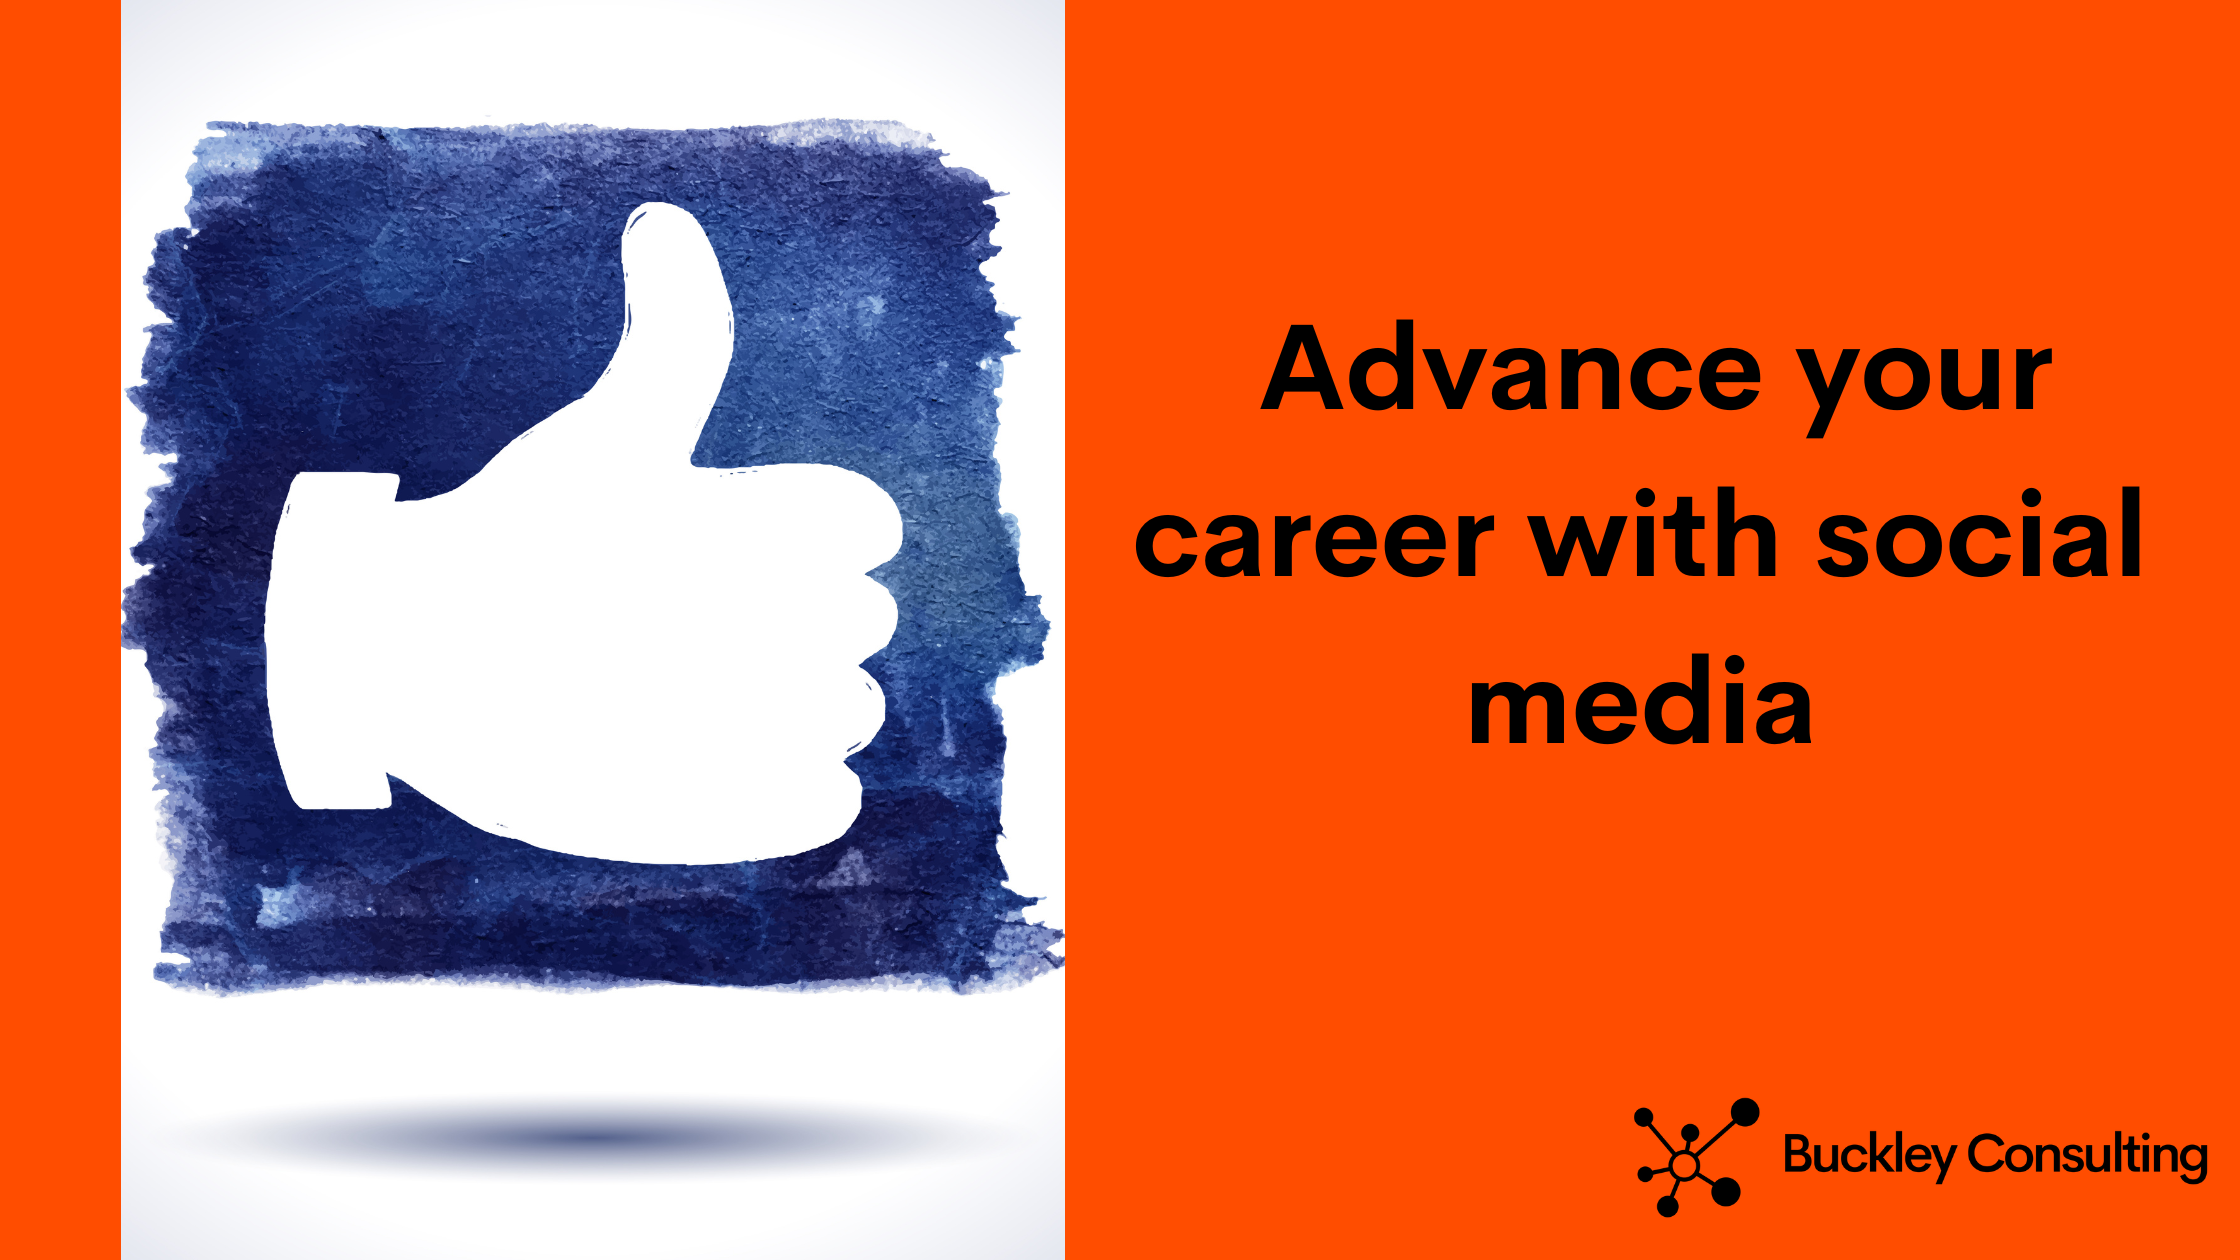 Advance your career with social media